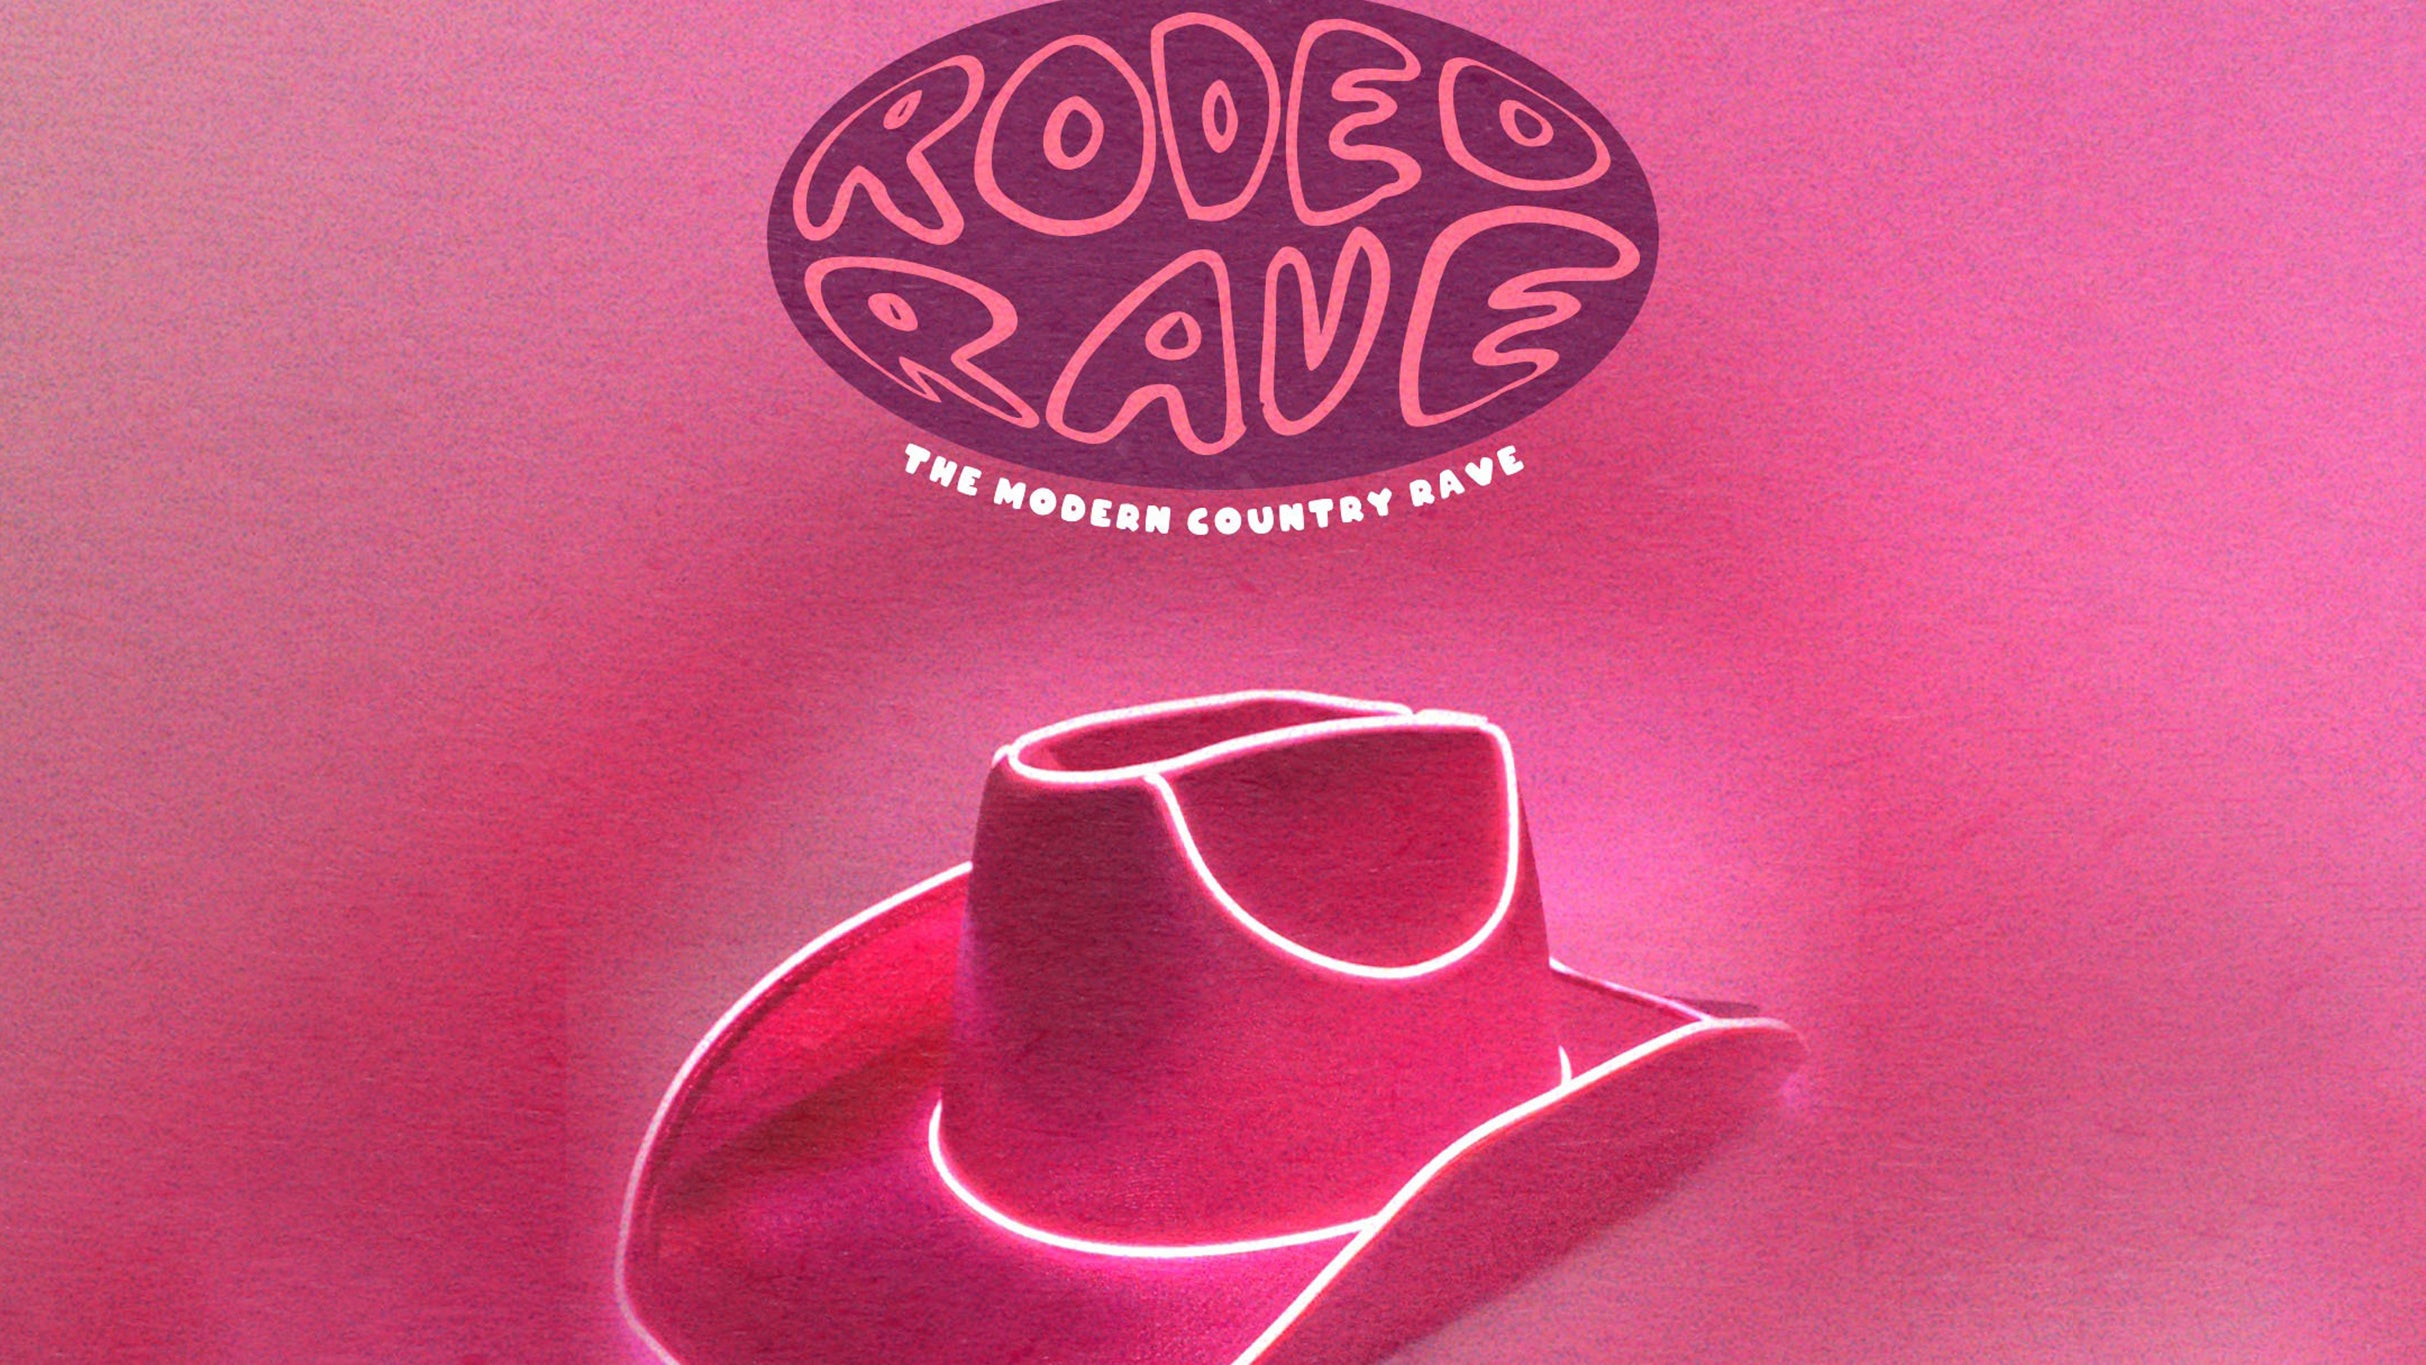 The Rodeo Rave (18+) at CONSTELLATION ROOM